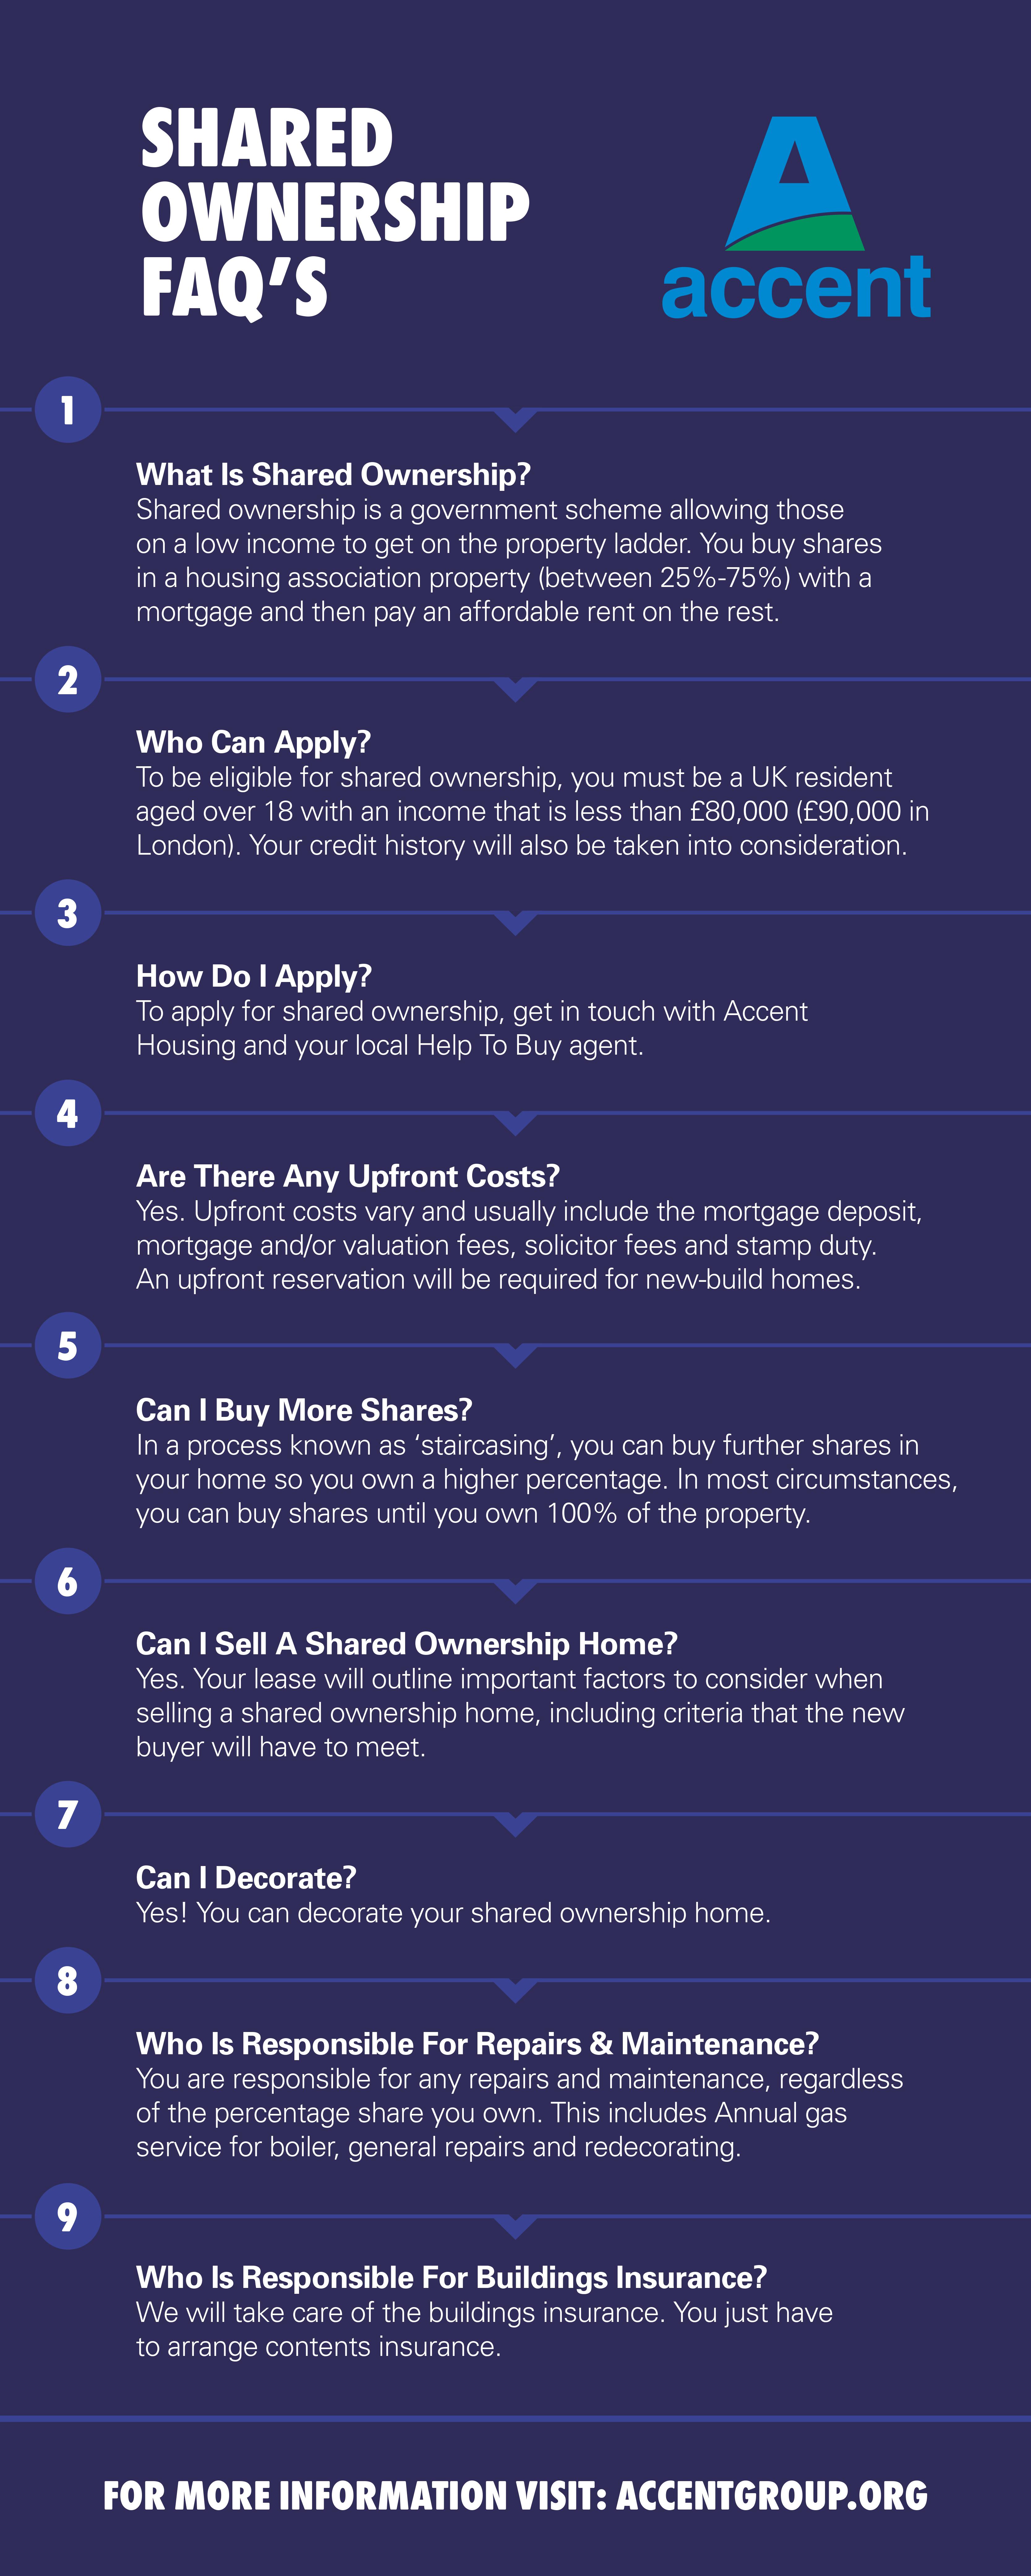 Shared ownership FAQs by Accent Housing